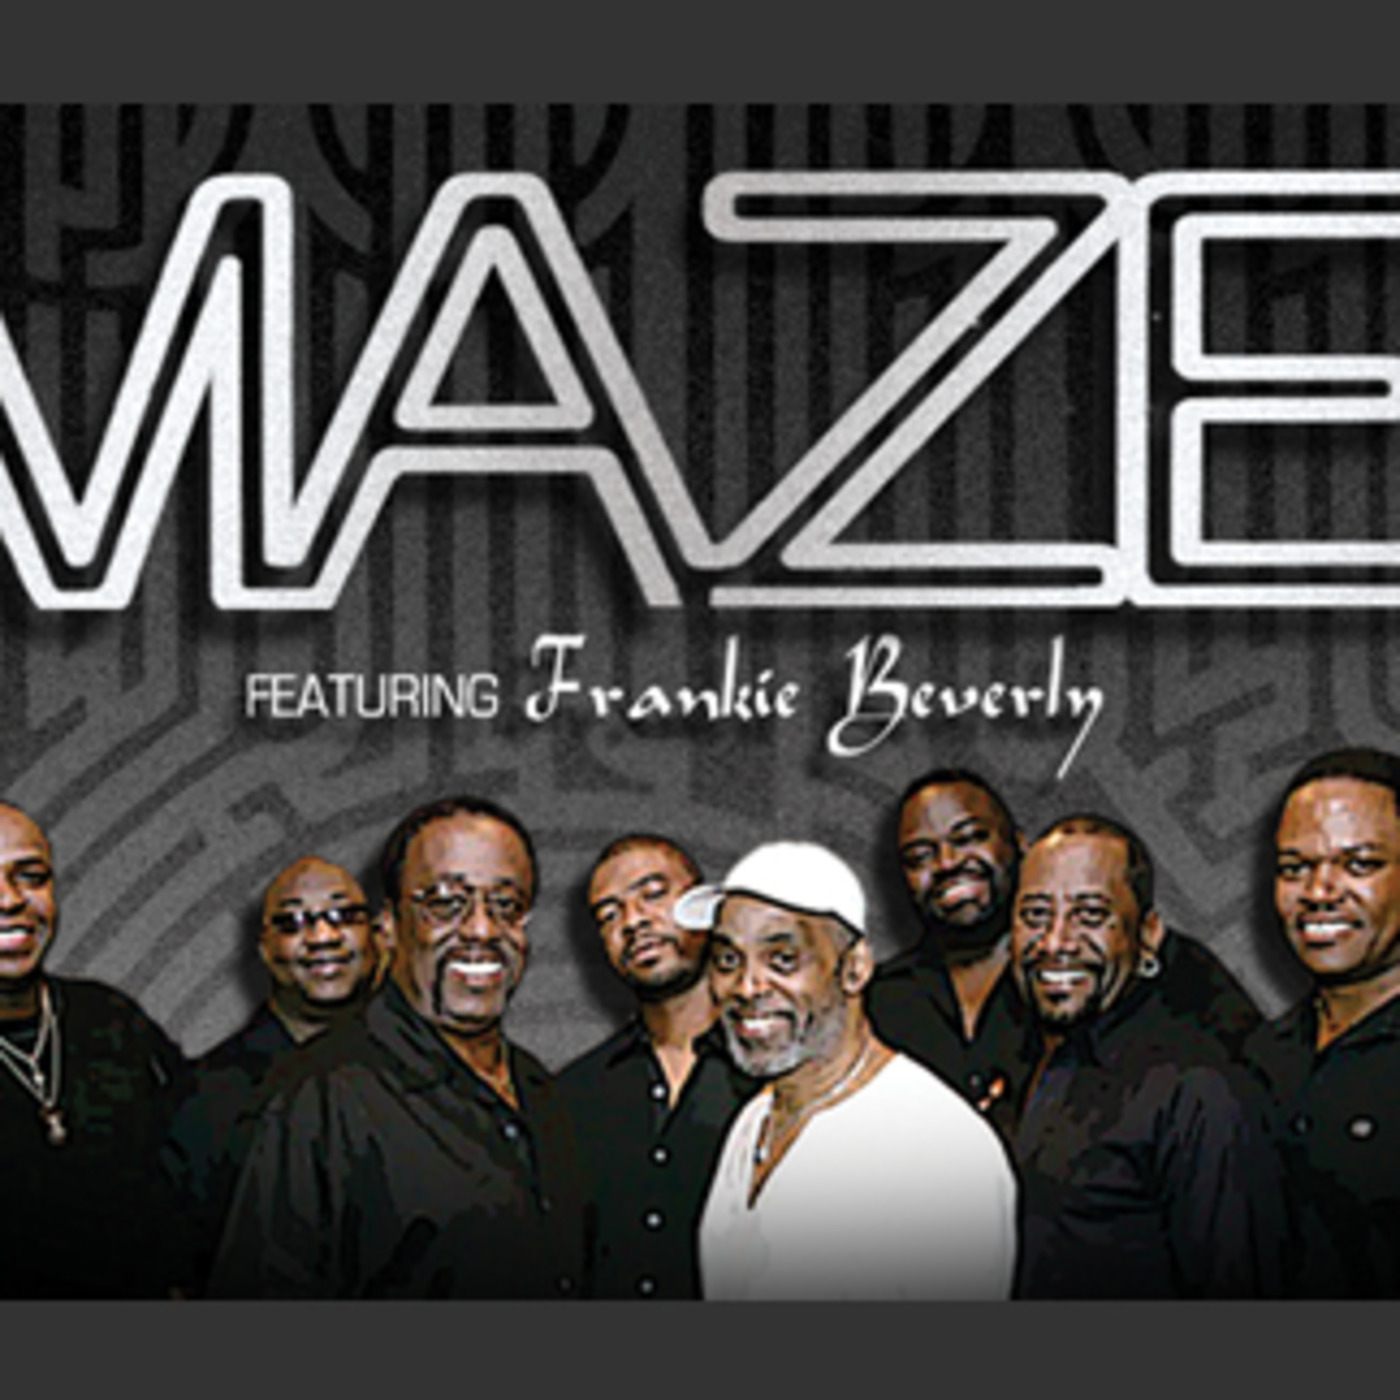 THE BEST OF MAZE FEAT FRANKIE BEVERLY